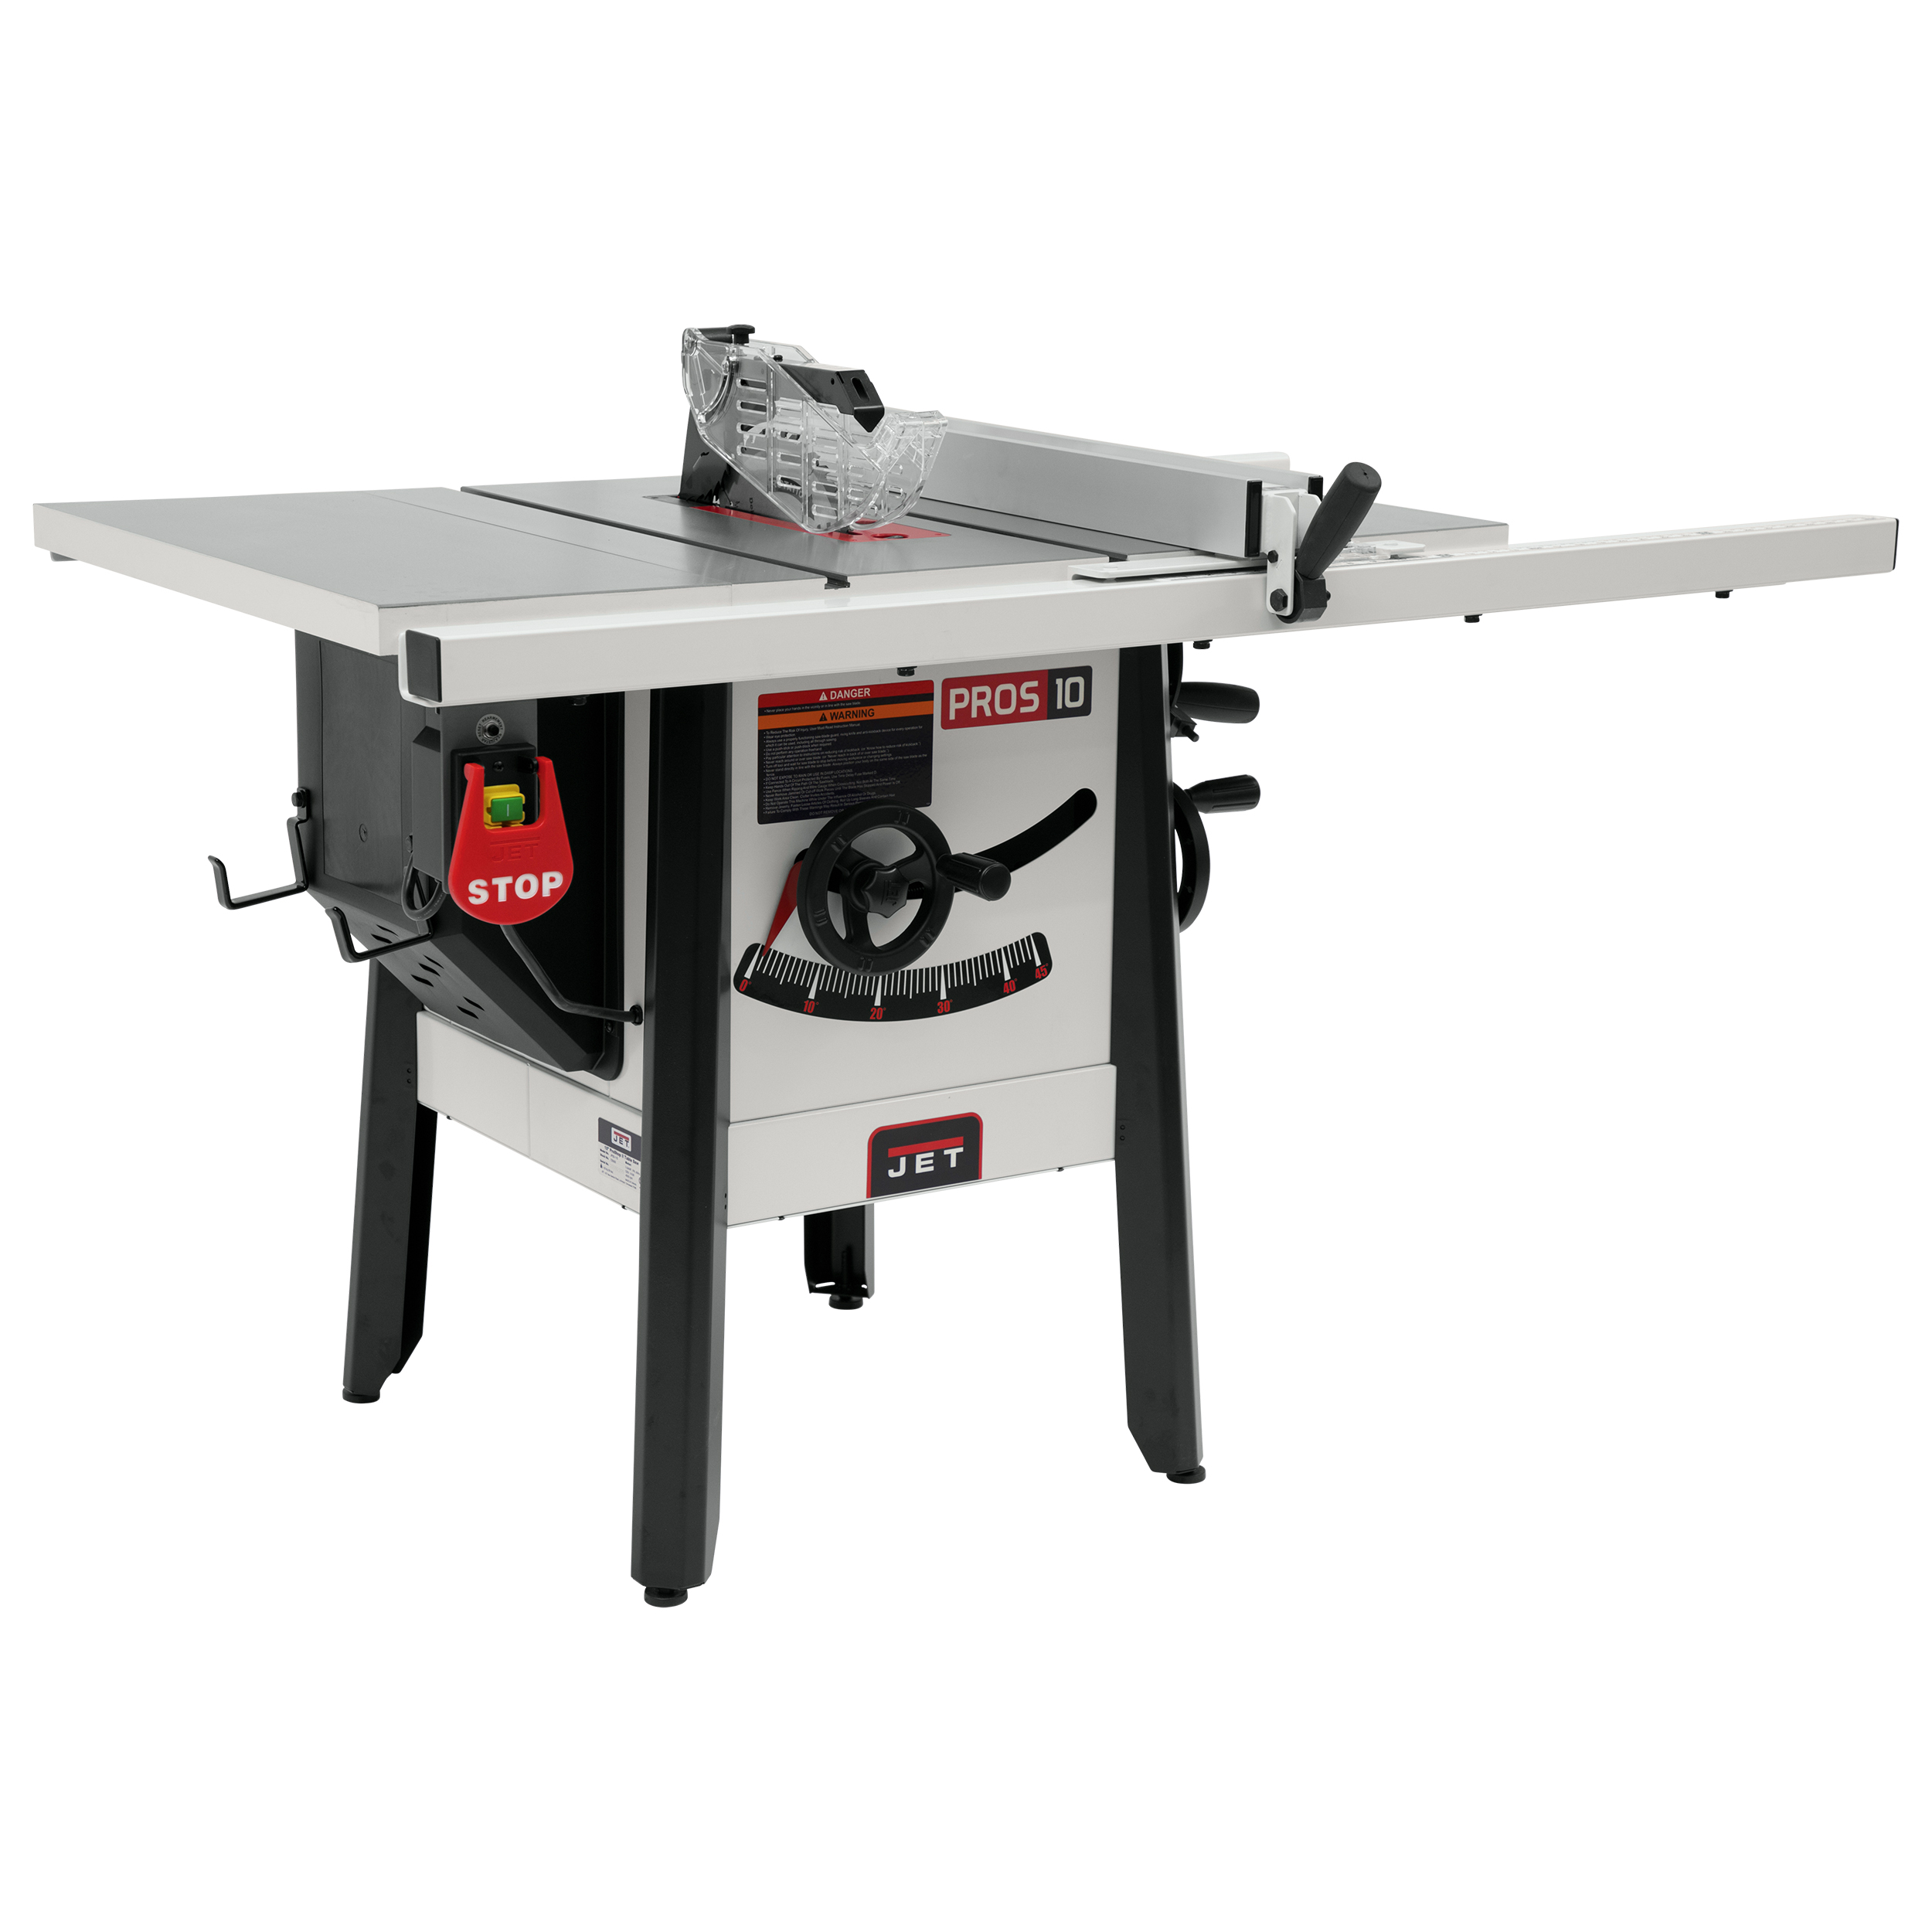 Proshop Ii Table Saw With Cast Wings, 115v, 30" Rip